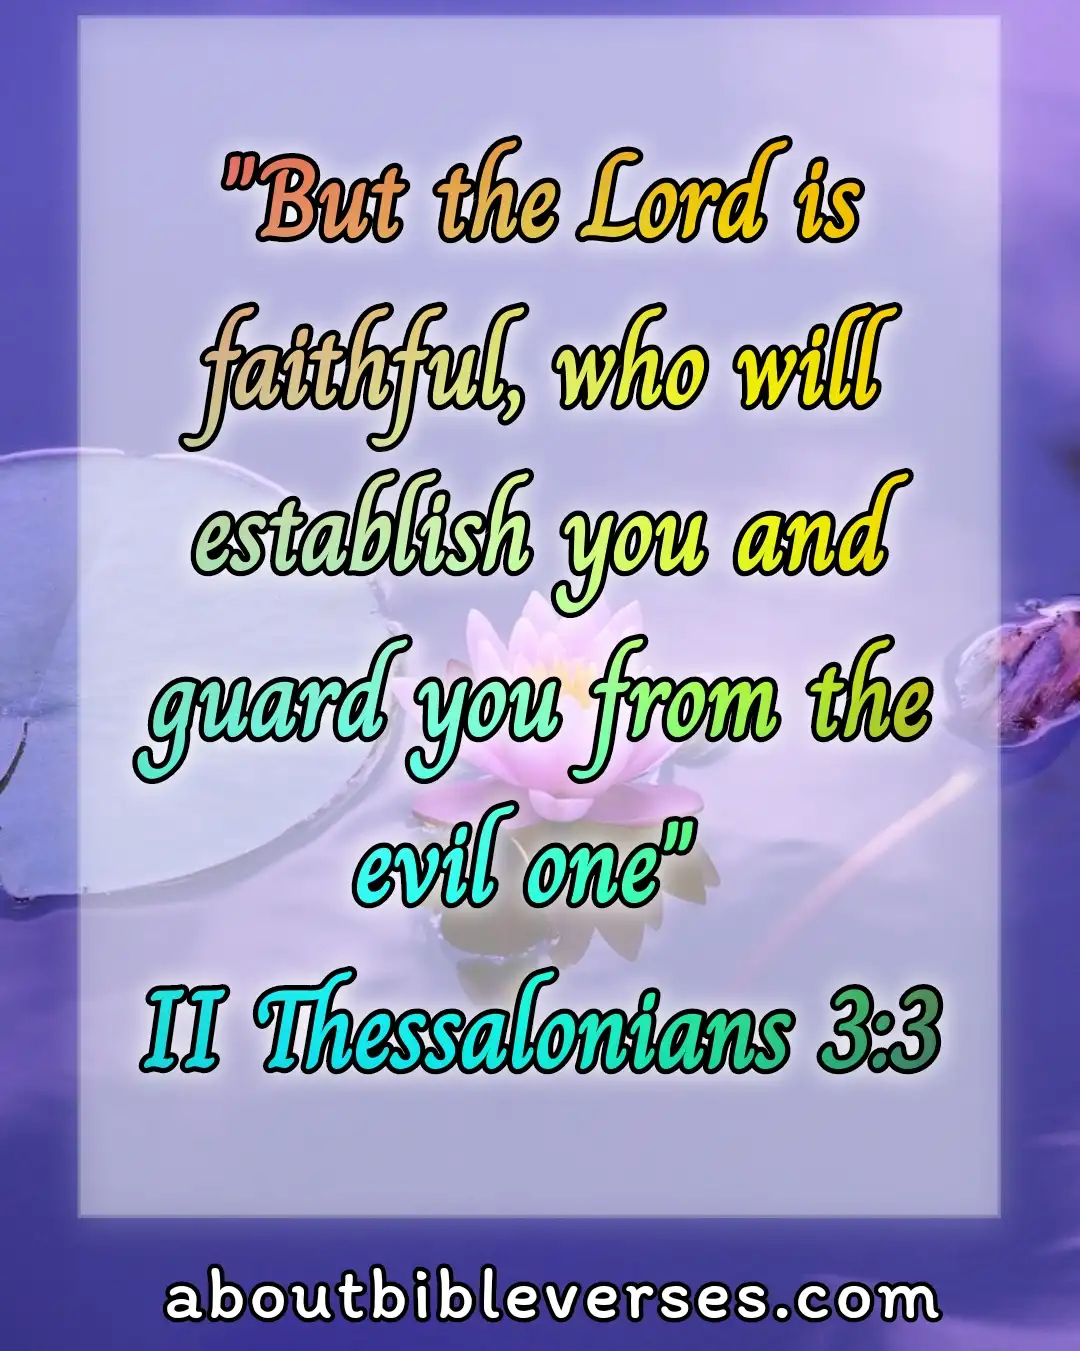 today bible verse (2 Thessalonians 3:3)